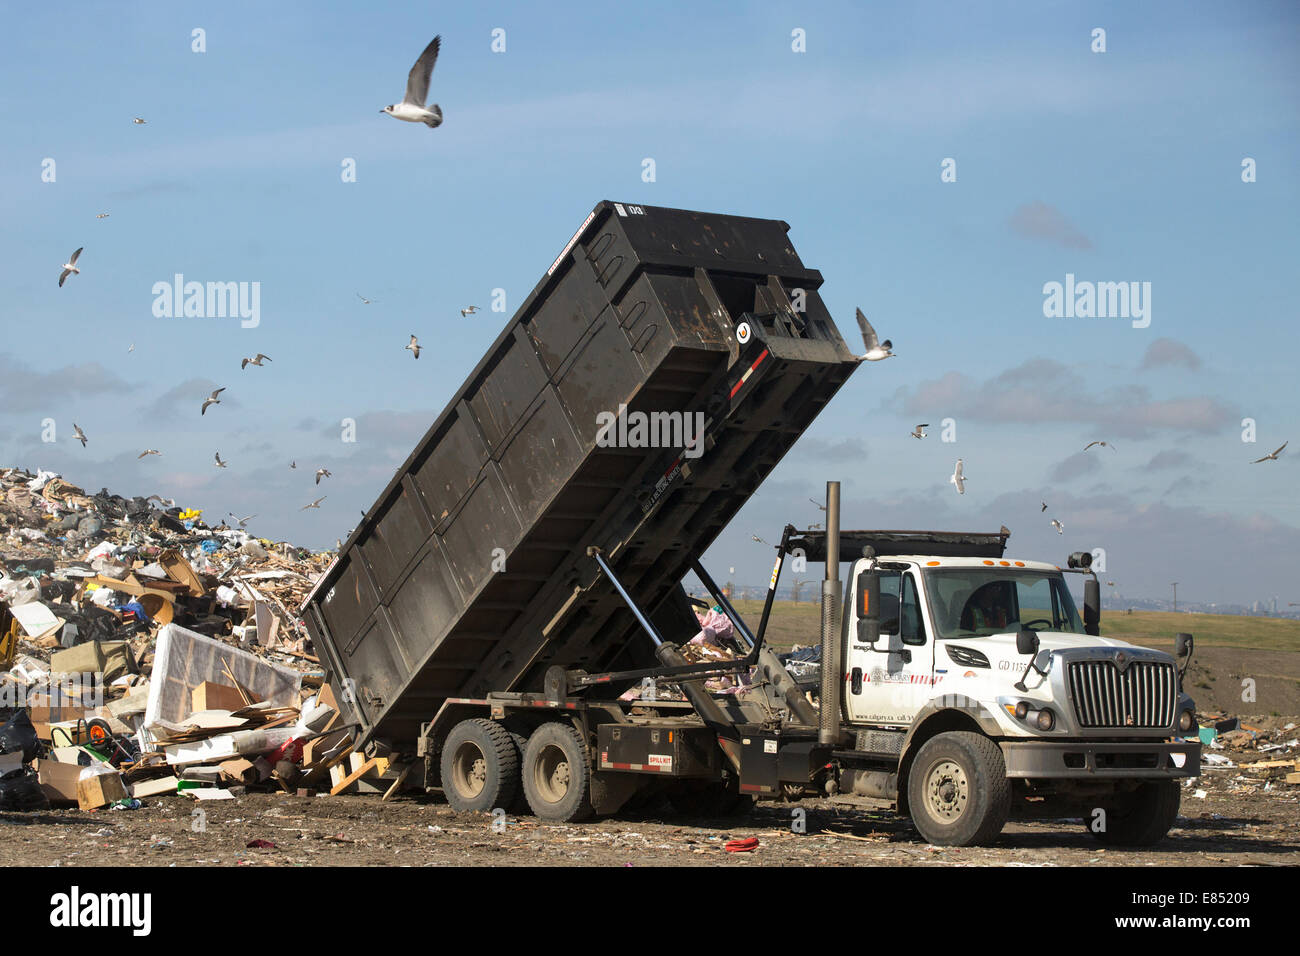 Truck dumping municipal garbage in active landfill cell at Shepard Waste Management Facility, Calgary, Alberta, Canada Stock Photo